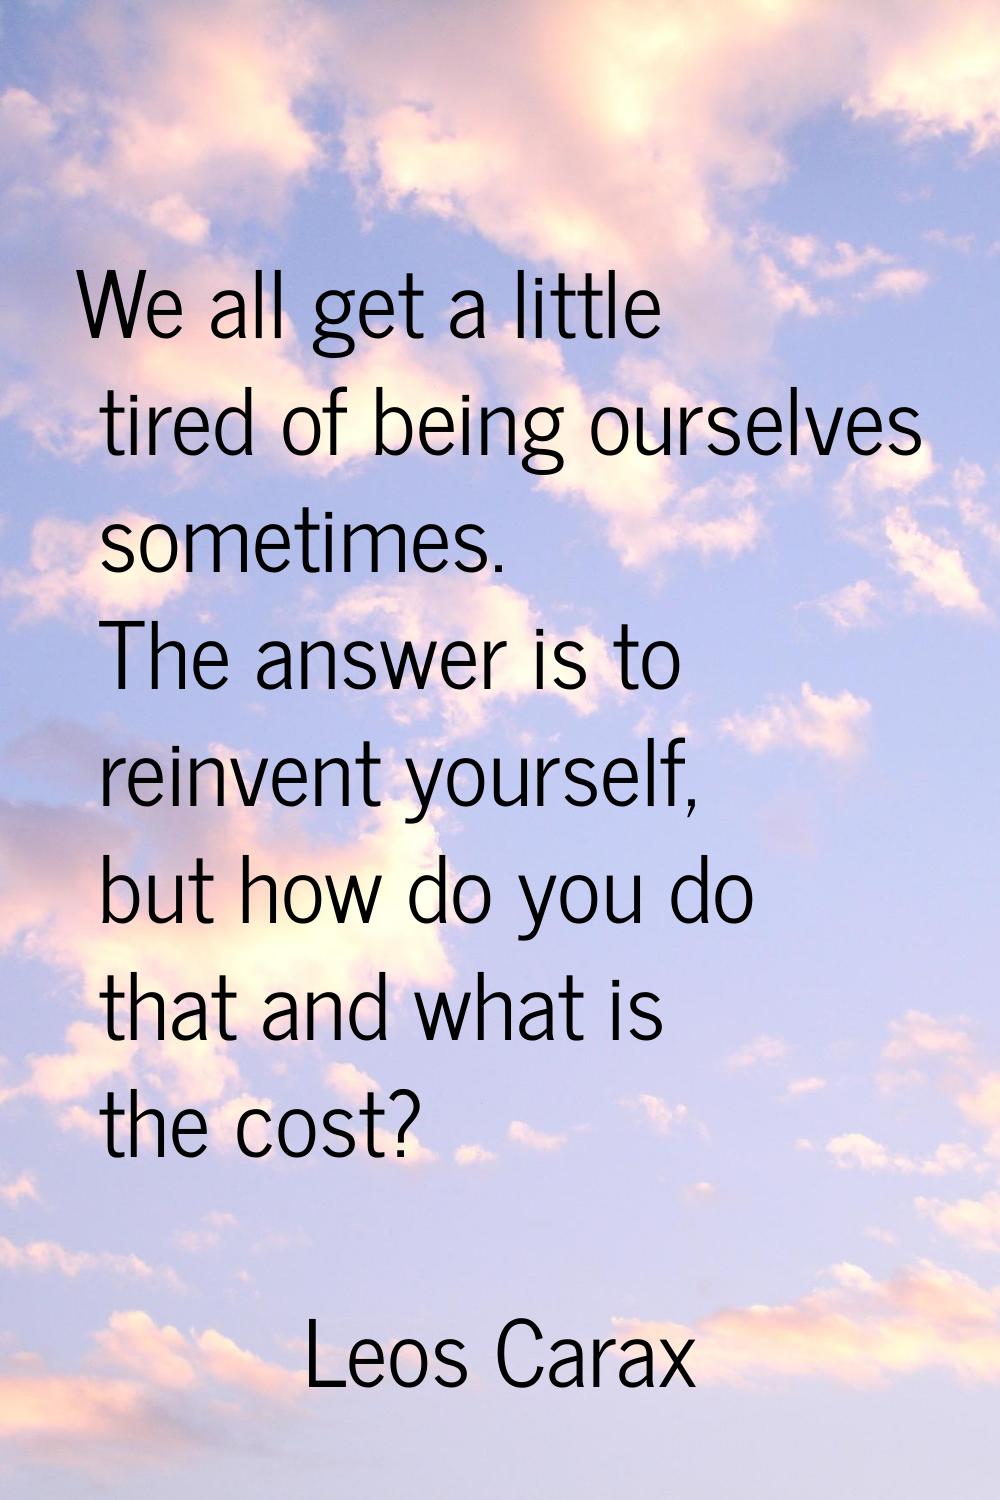 We all get a little tired of being ourselves sometimes. The answer is to reinvent yourself, but how